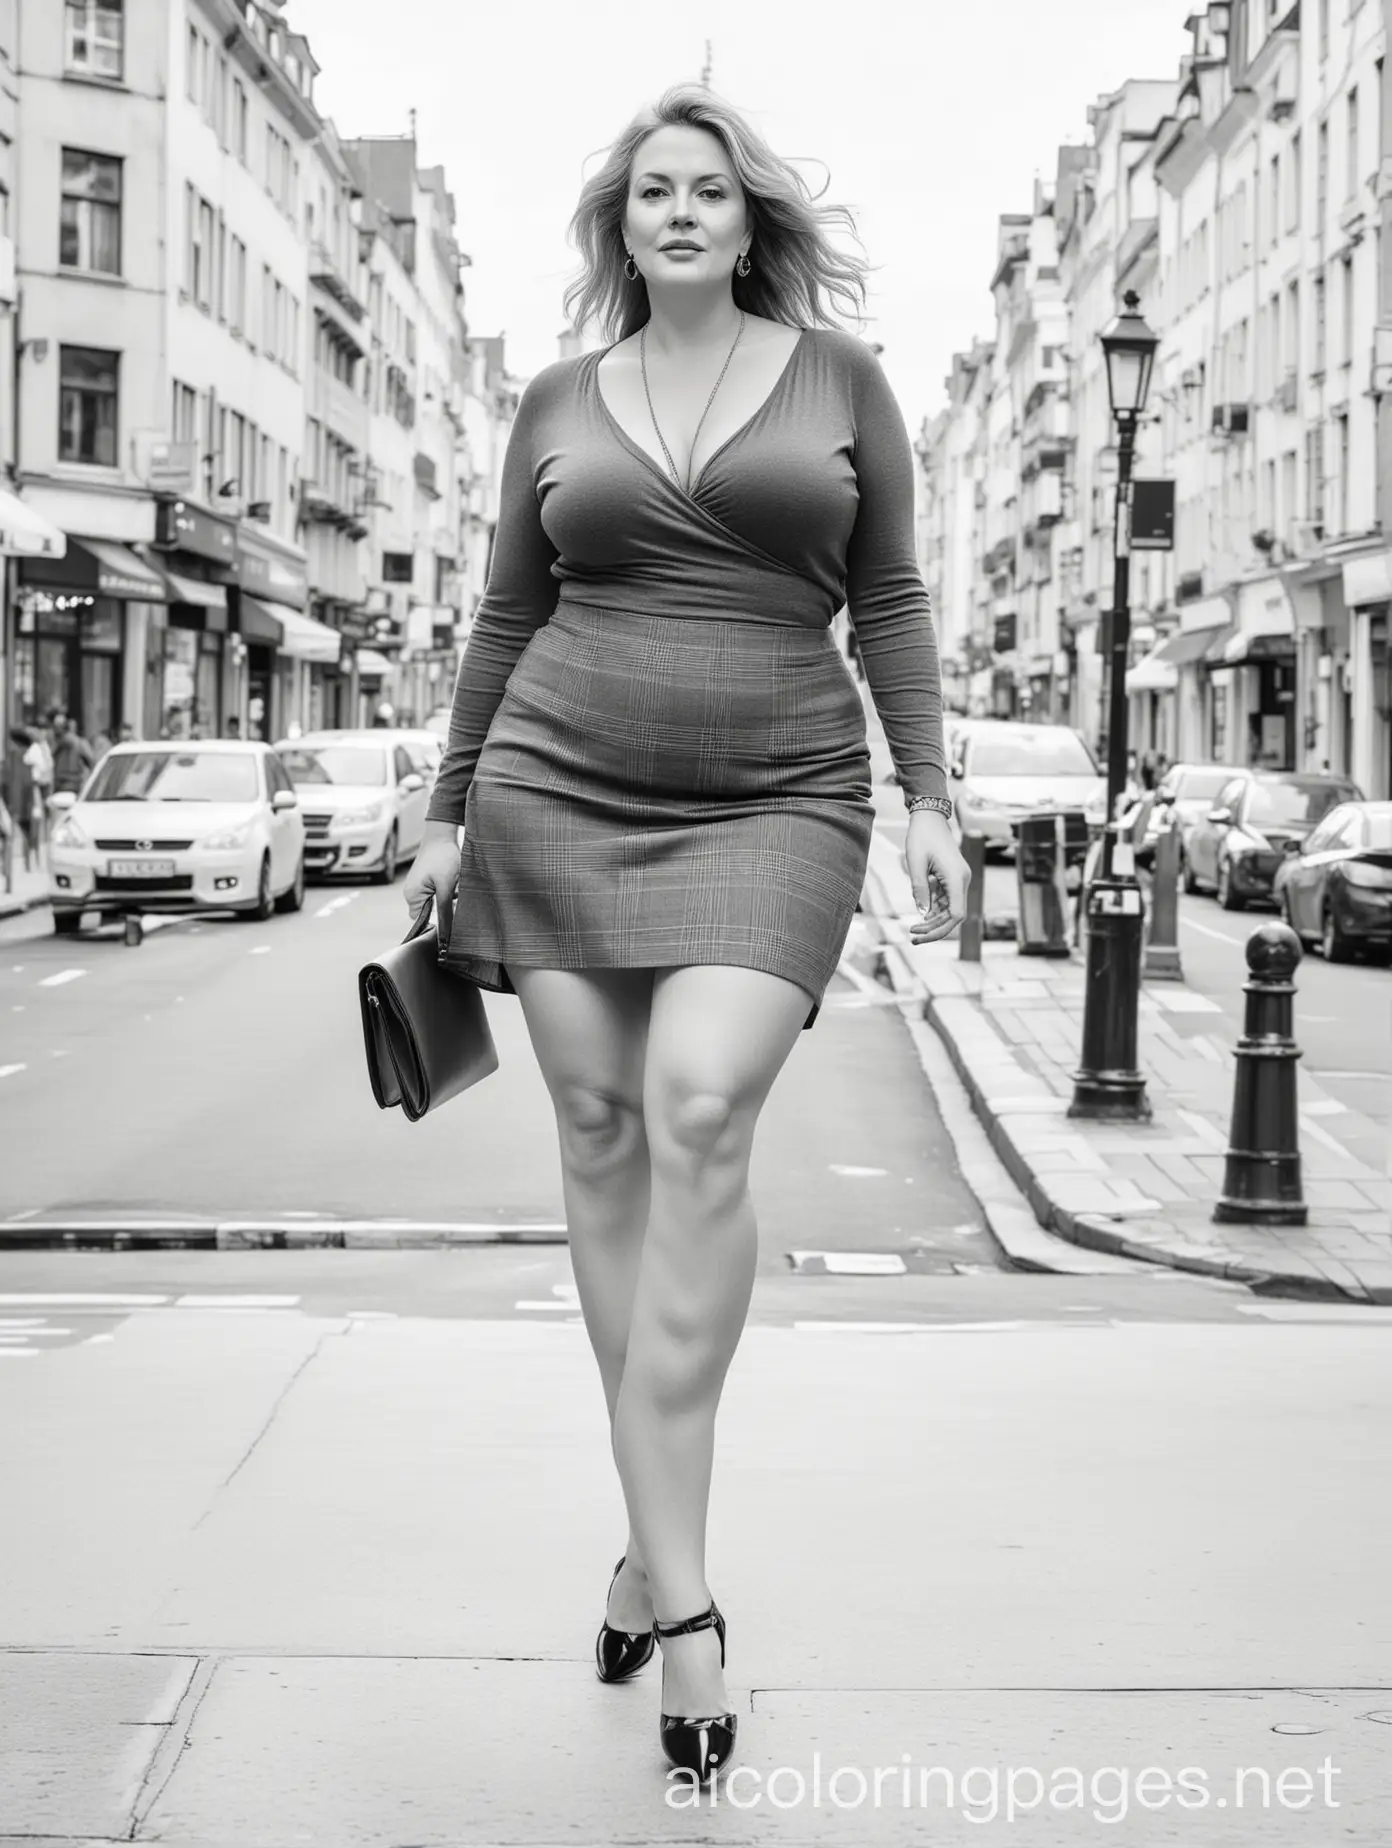 Mature fat lady in a mini skirt, on high heels walking along the city street, the lady with interest looking at passers-by men, Coloring Page, black and white, line art, white background, Simplicity, Ample White Space. The background of the coloring page is plain white to make it easy for young children to color within the lines. The outlines of all the subjects are easy to distinguish, making it simple for kids to color without too much difficulty